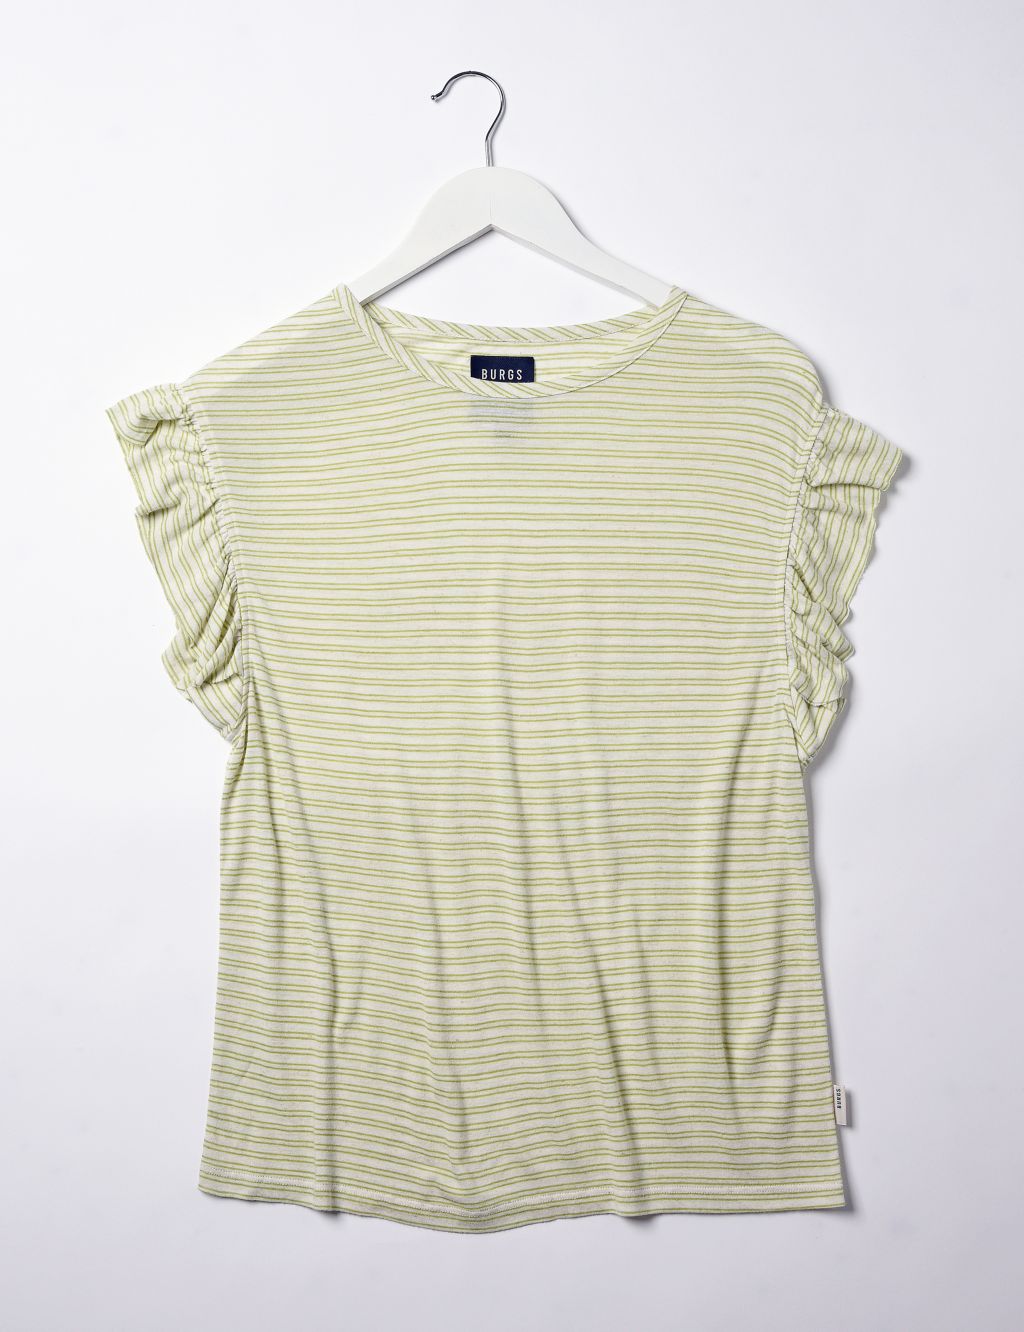 Jersey Striped Frill Detail Top image 2